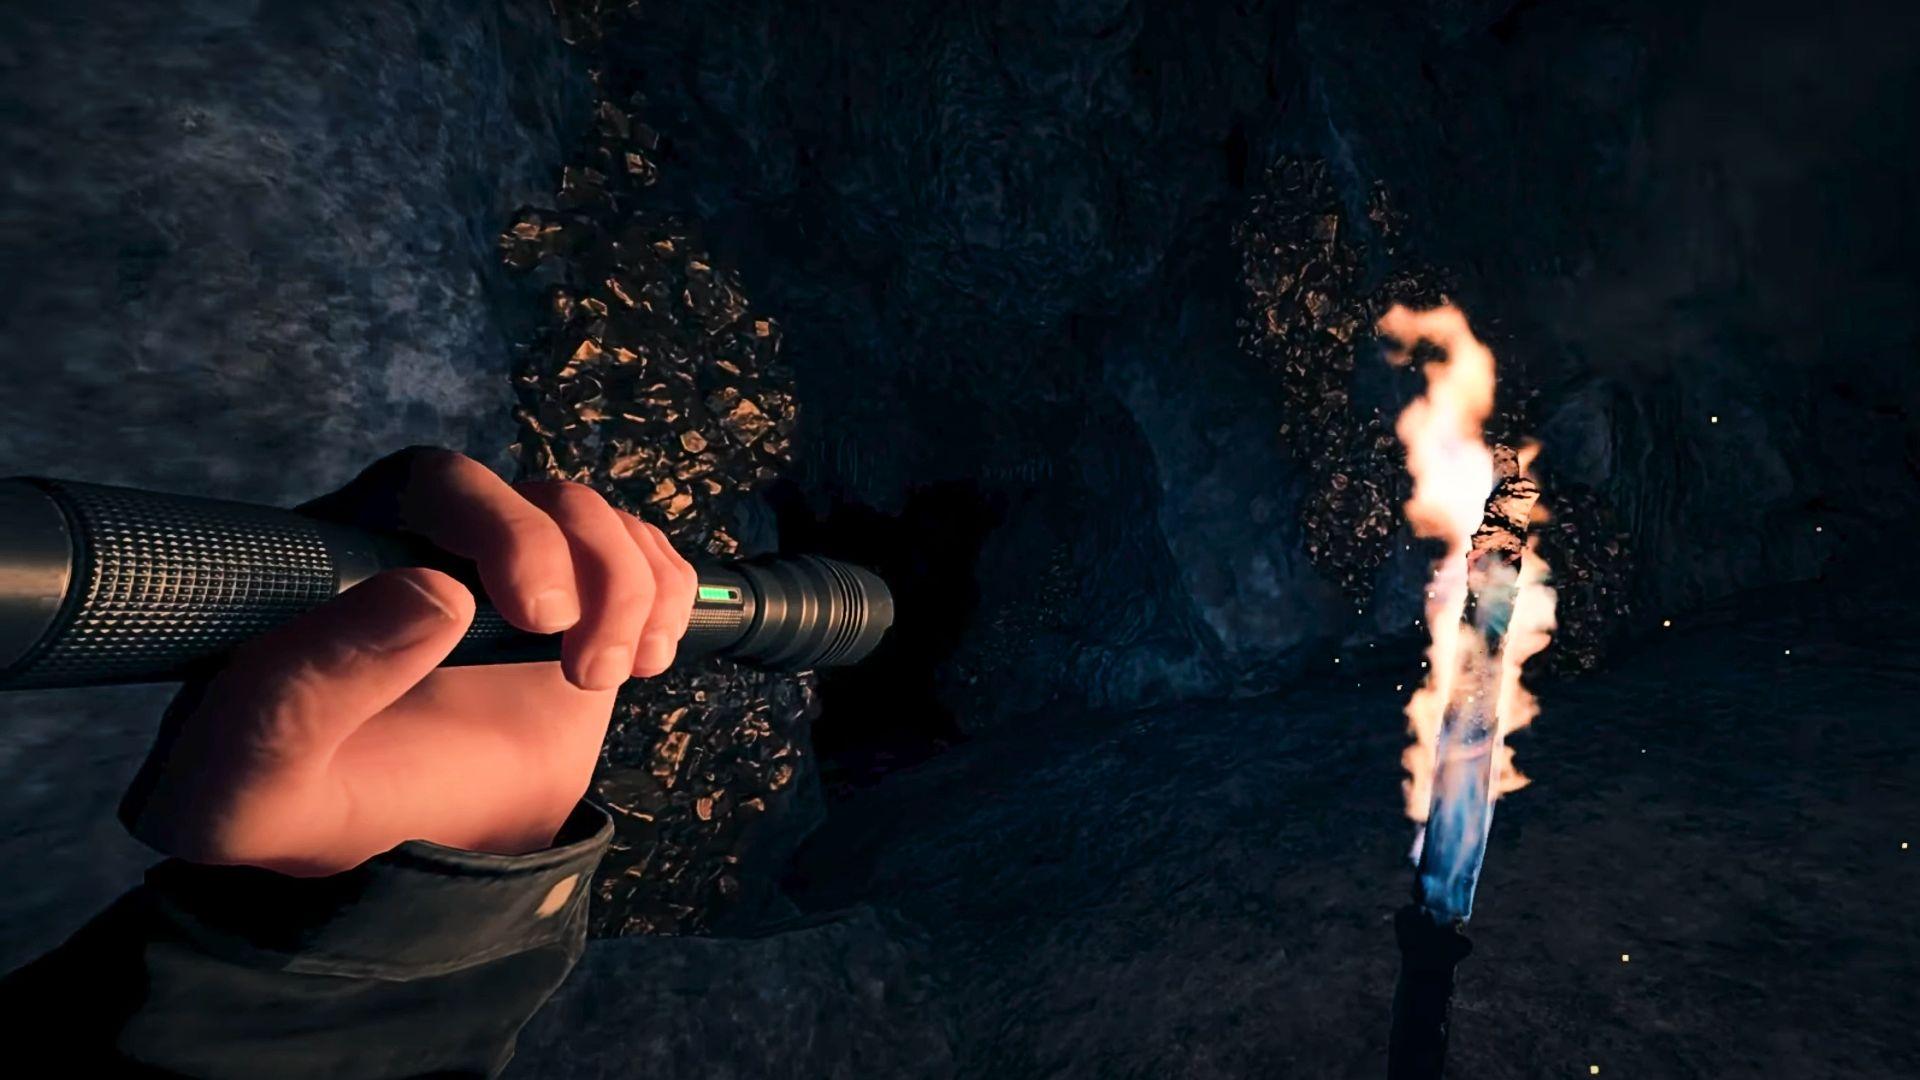 Sons of the Jungle rope gun: The main fork in the cave system that will take you to the rope gun position in Endnight's survival horror game characterized by piles of ore and bone.